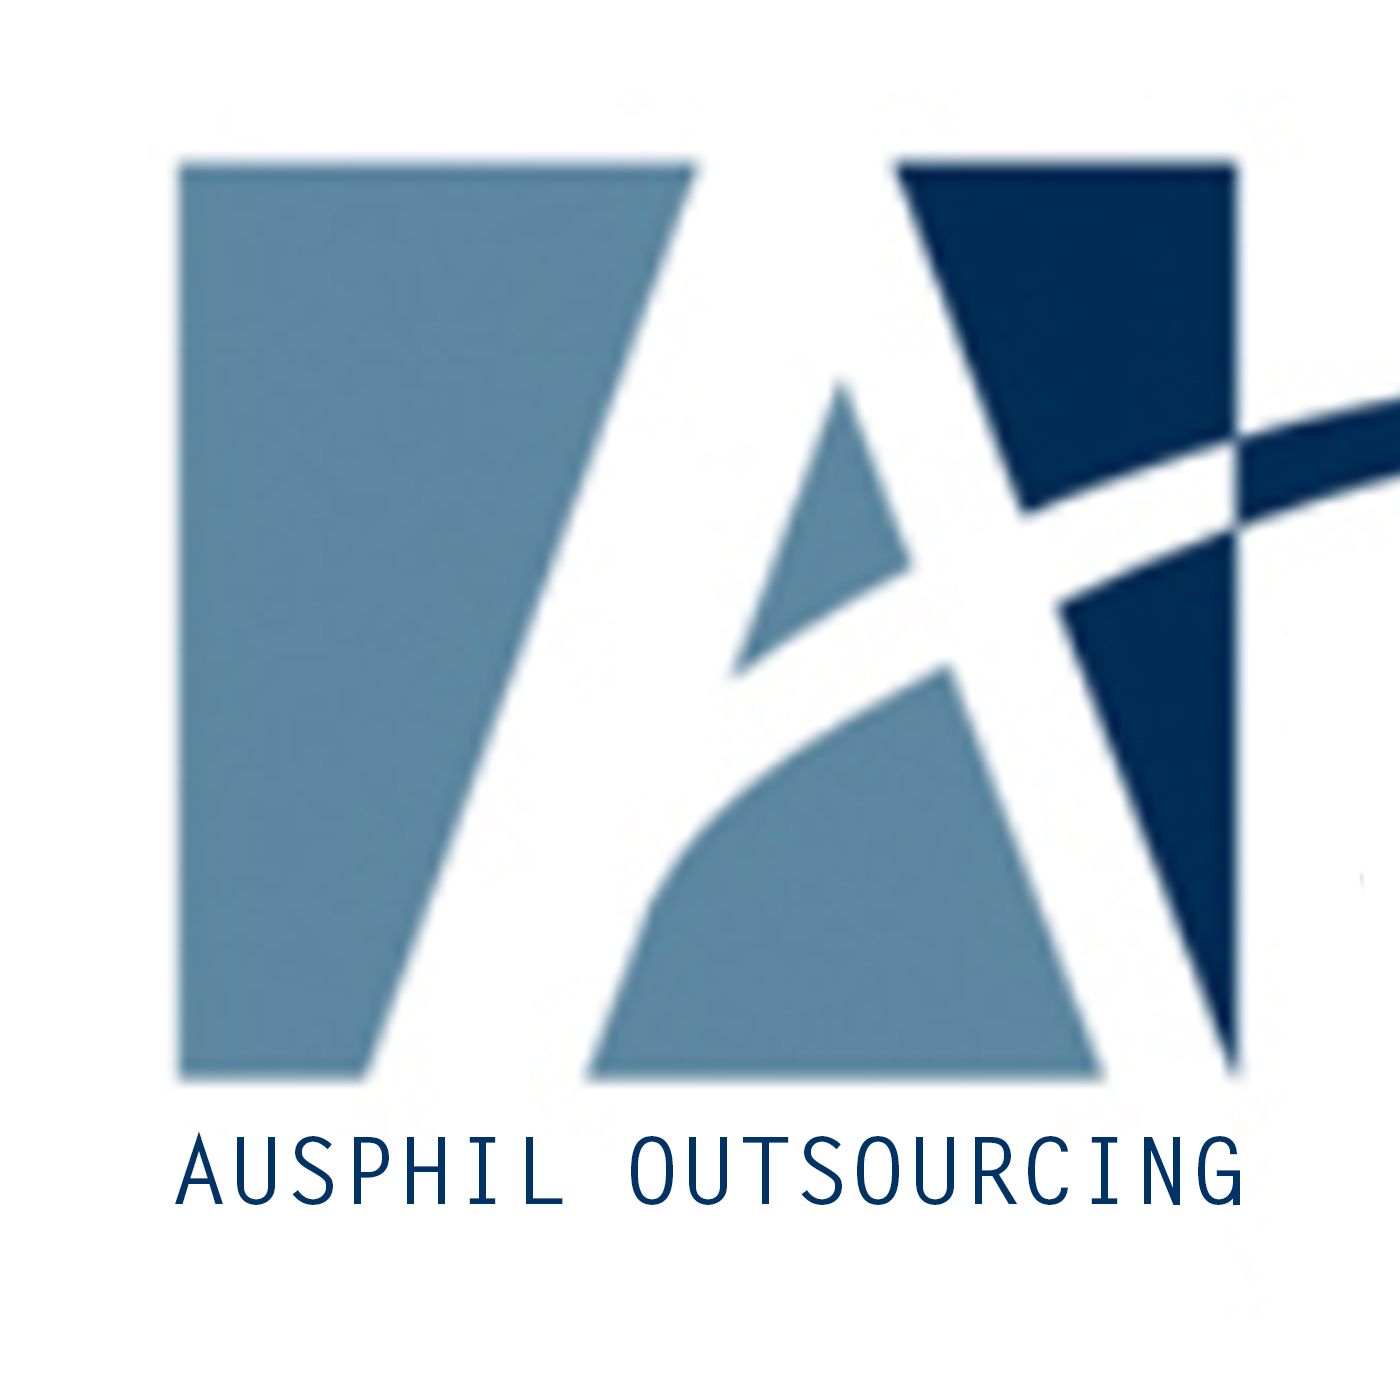 AusPhil Outsourcing